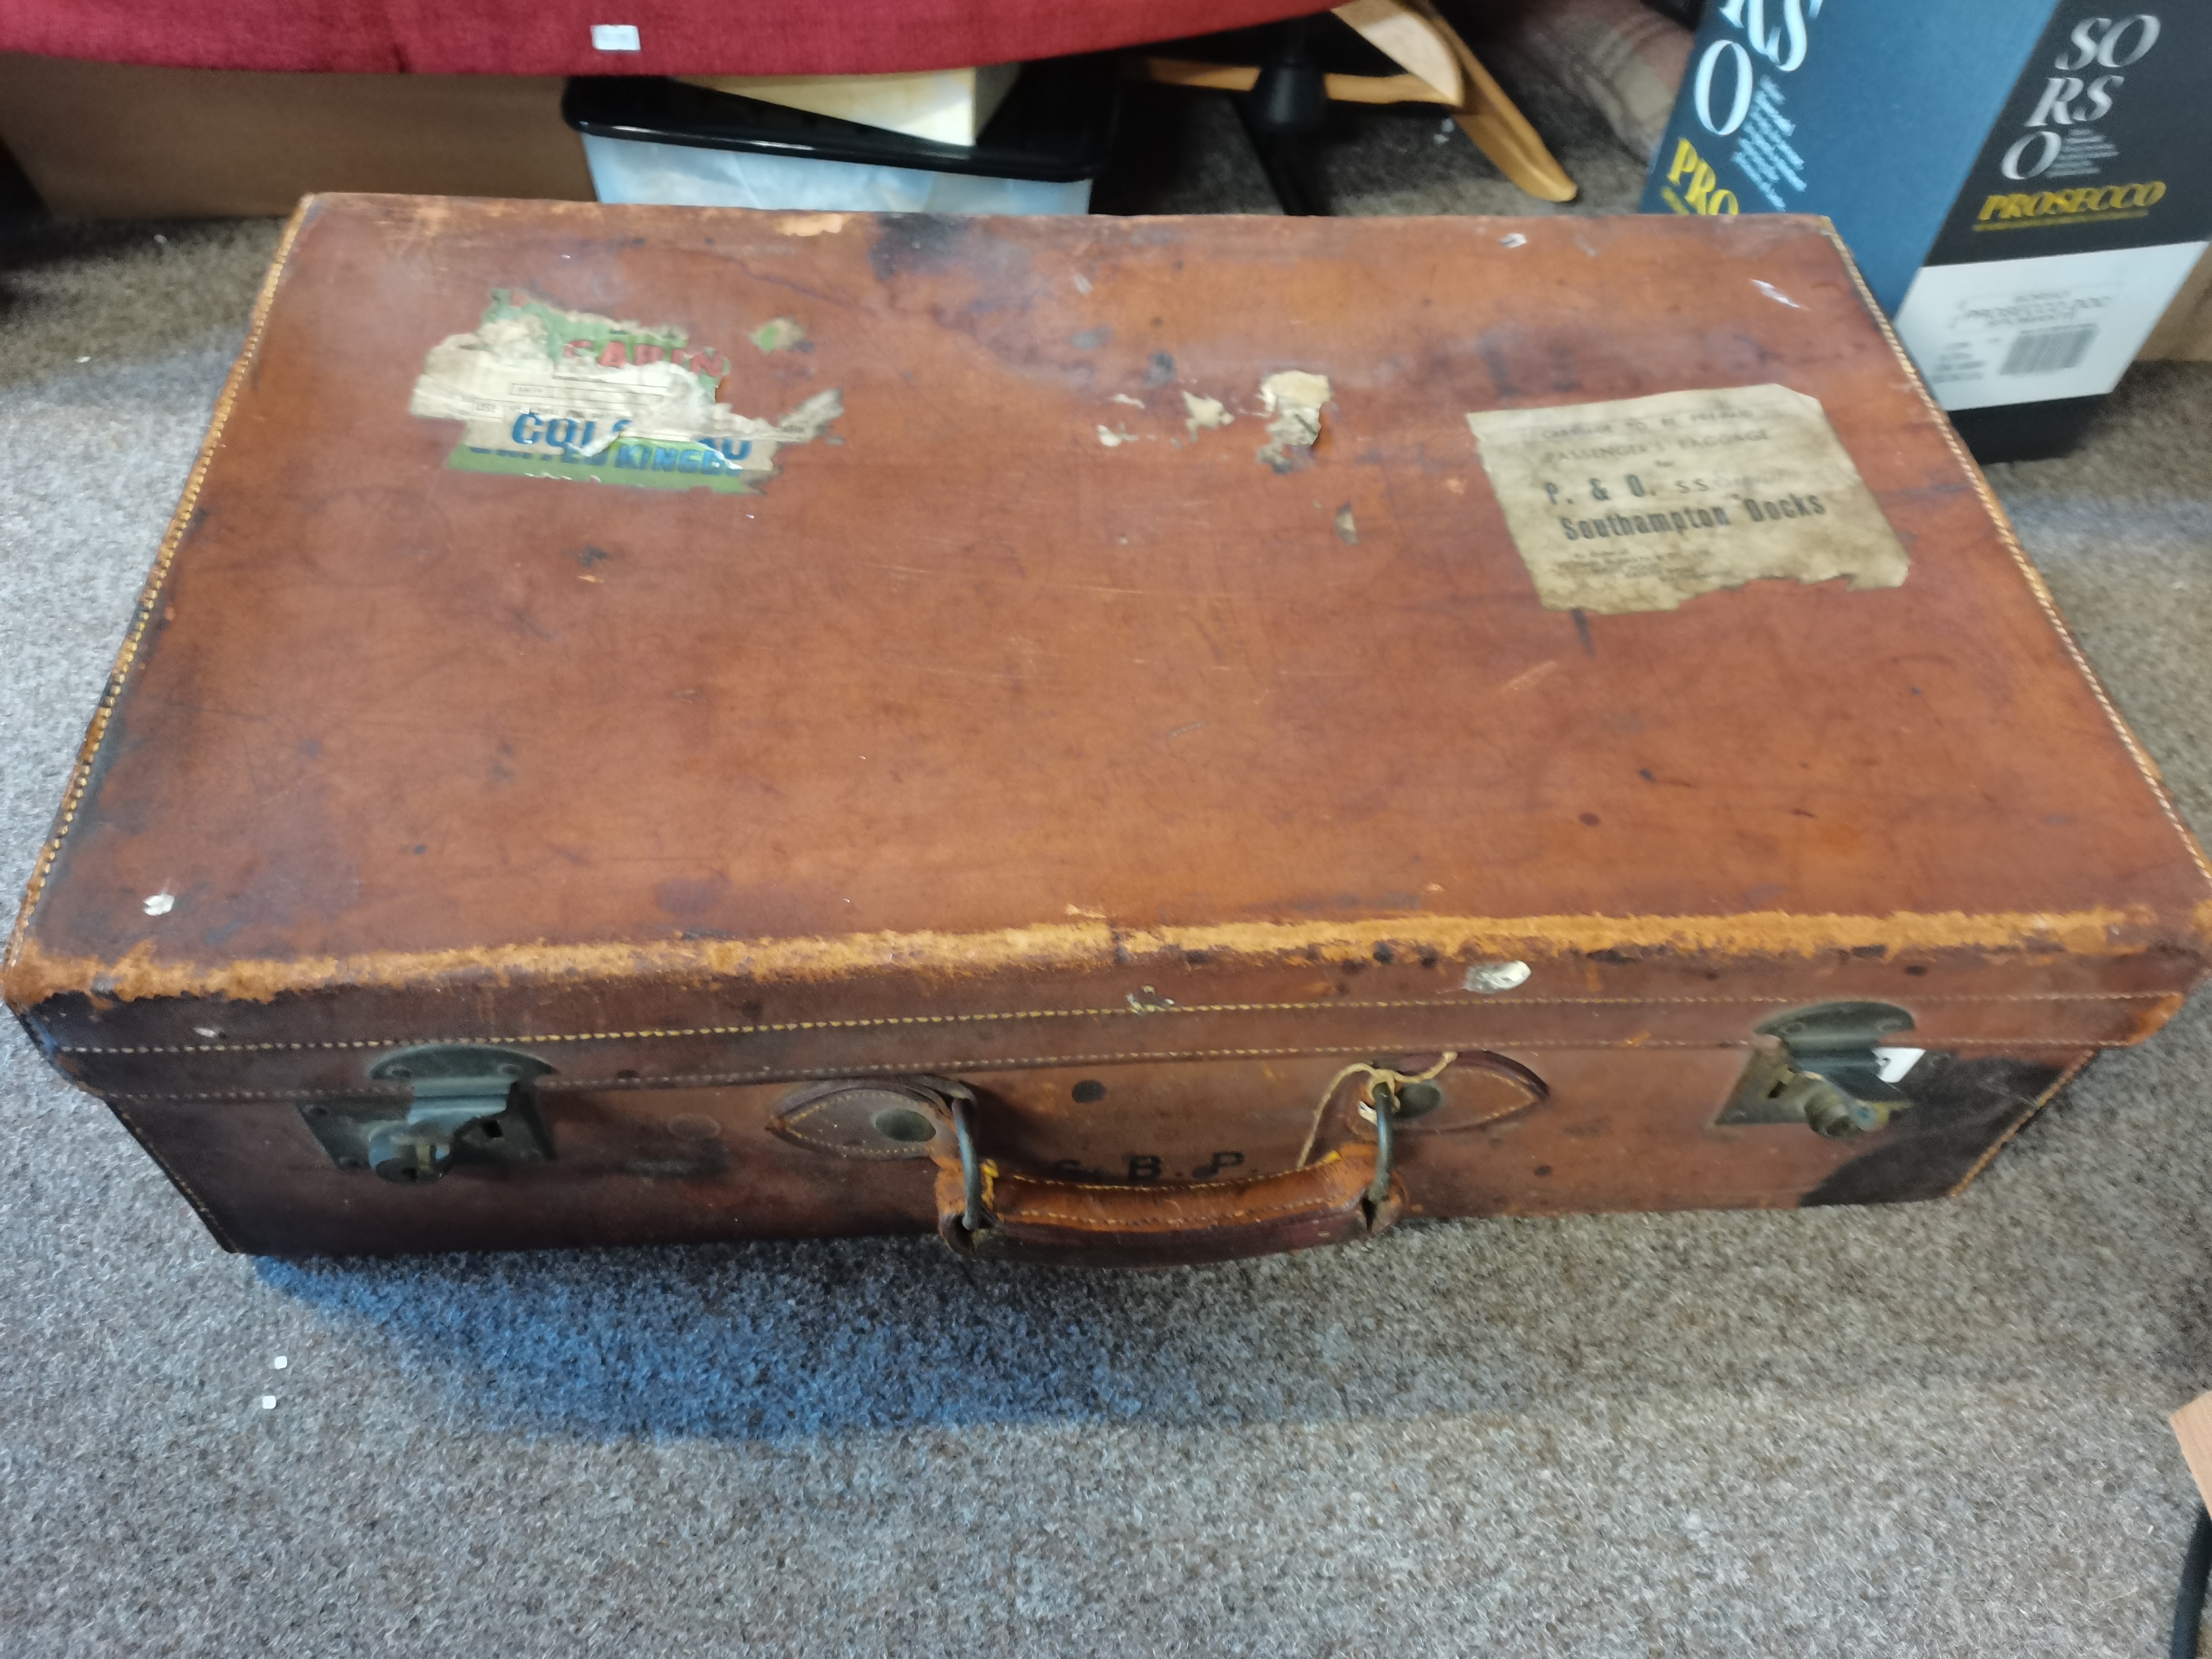 Suitcase - Bought from Harrods belonged to Tom Peak (of Peak Freans biscuits)